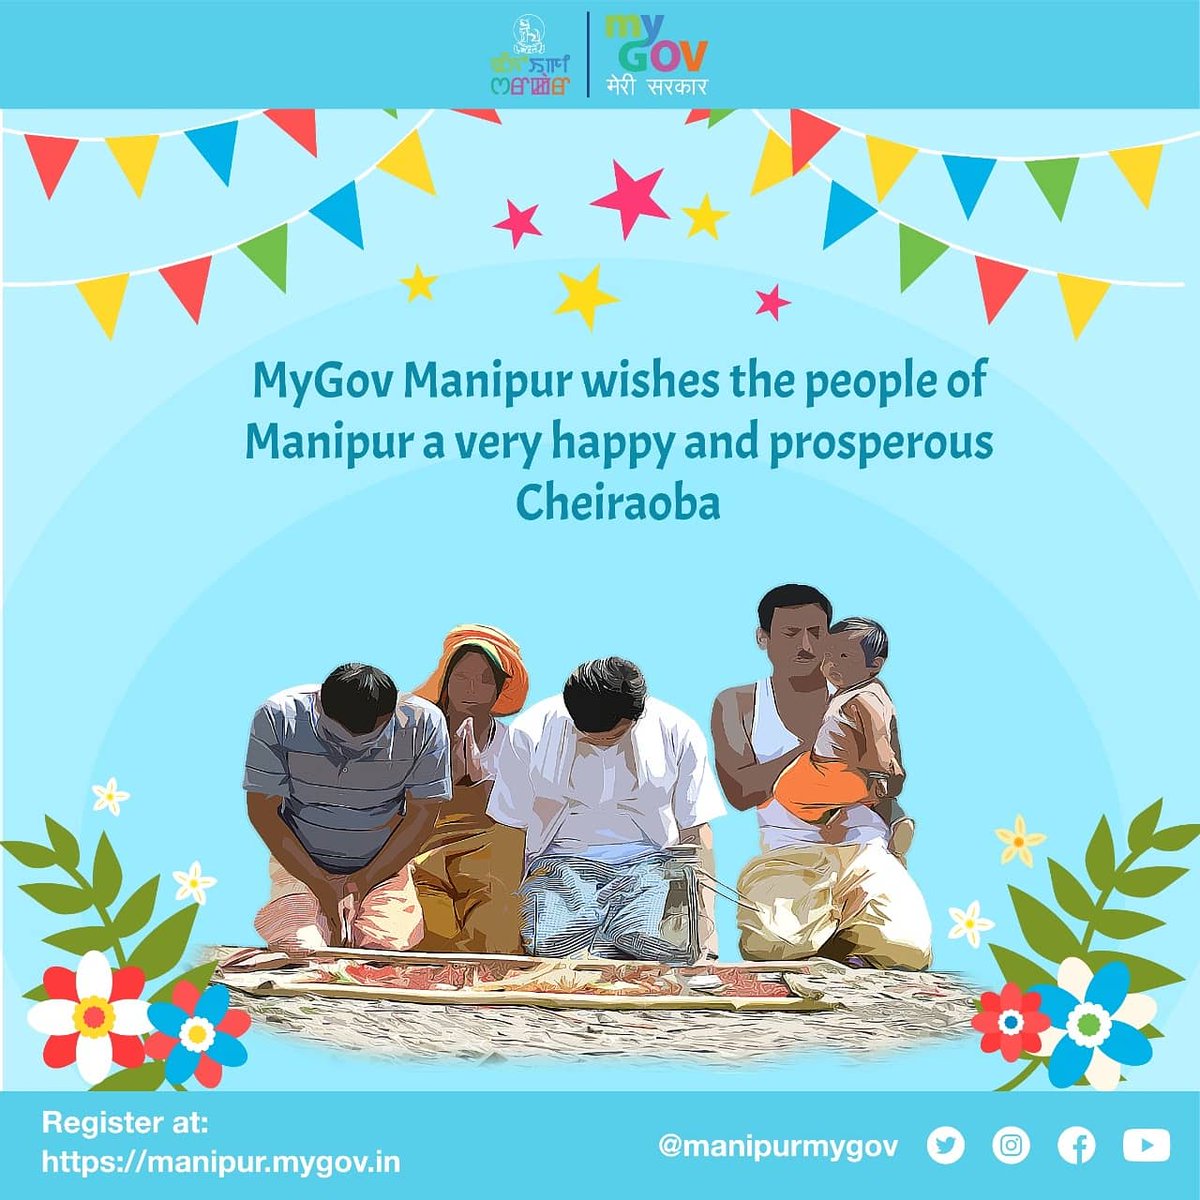 MyGov Manipur extends heartiest greetings to the people of Manipur on the occasion of Sajibu Nongma Panba Cheiraoba. May the New Year bring positivity, happiness and prosperity to our lives. 
#ManipuriNewYear #Cheiraoba
@nheptulla